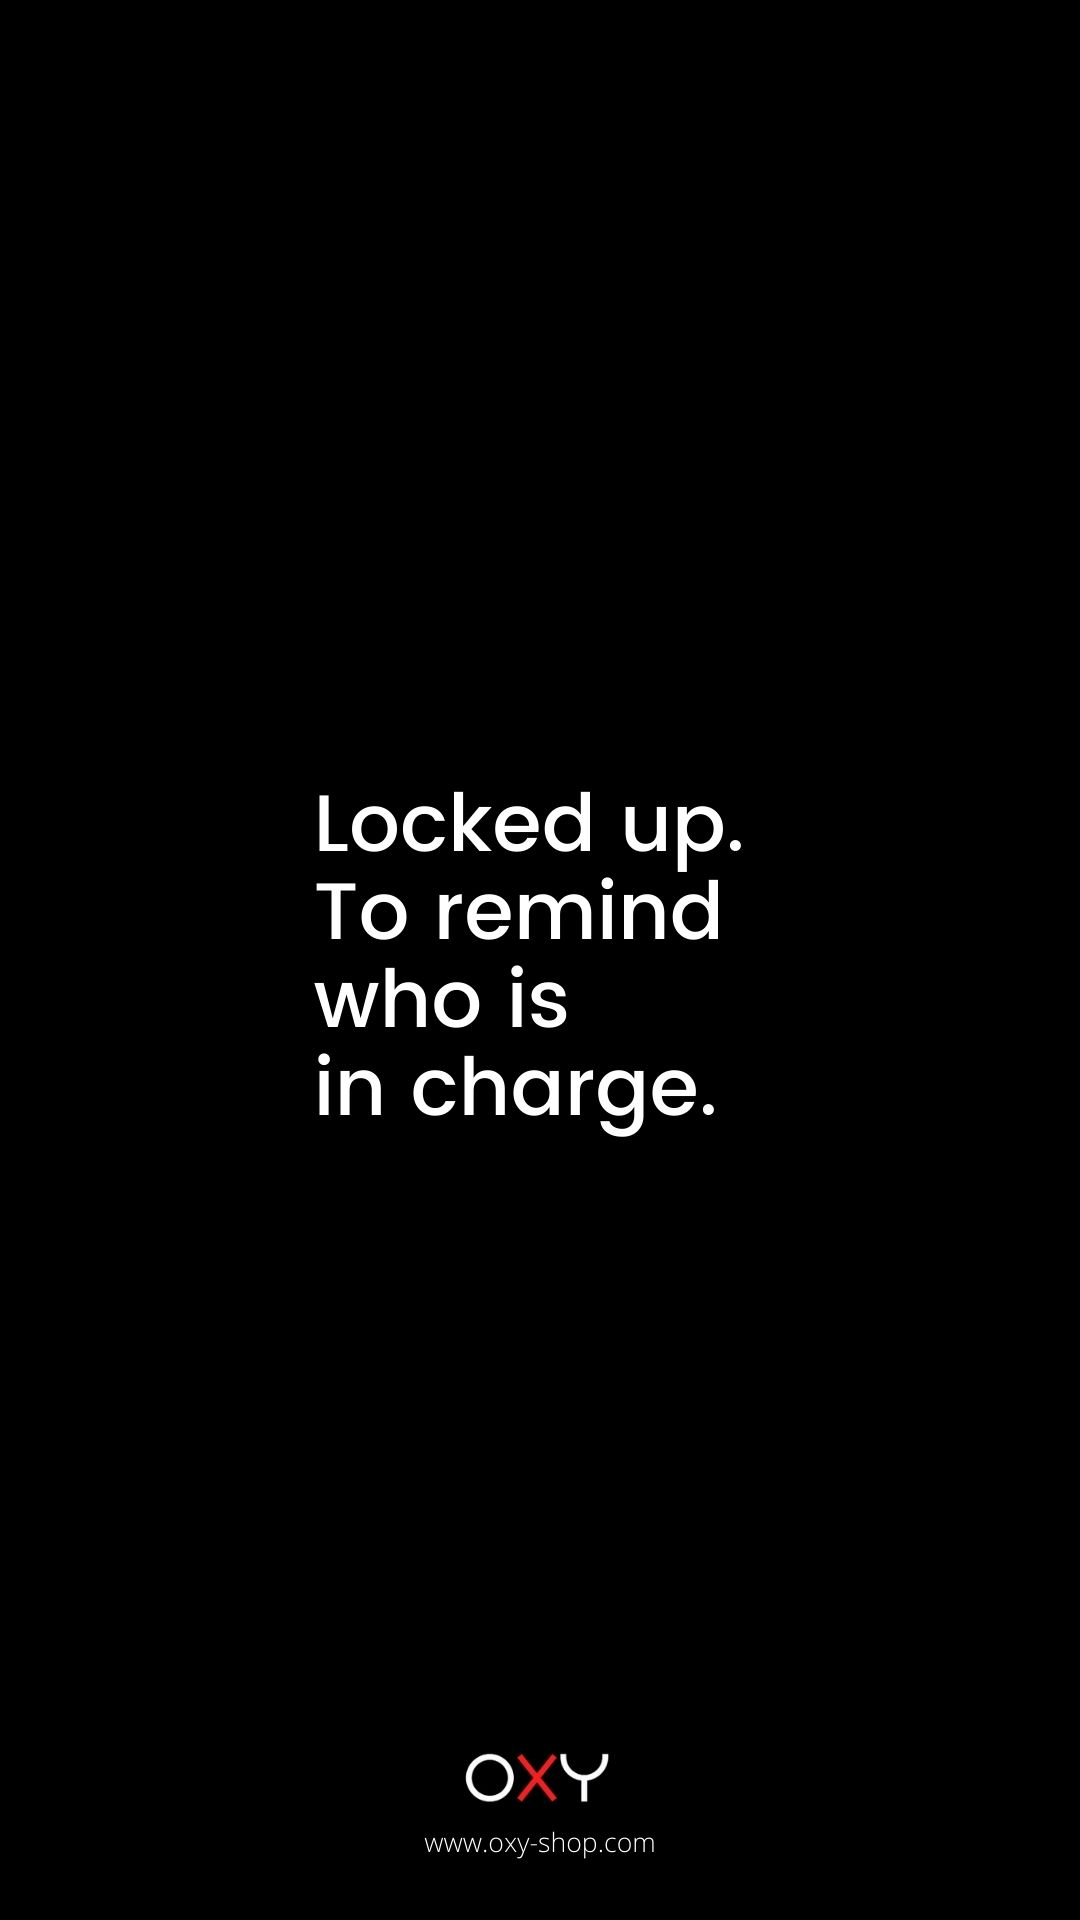 Locked up. To remind who is in charge. - BDSM wallpaper